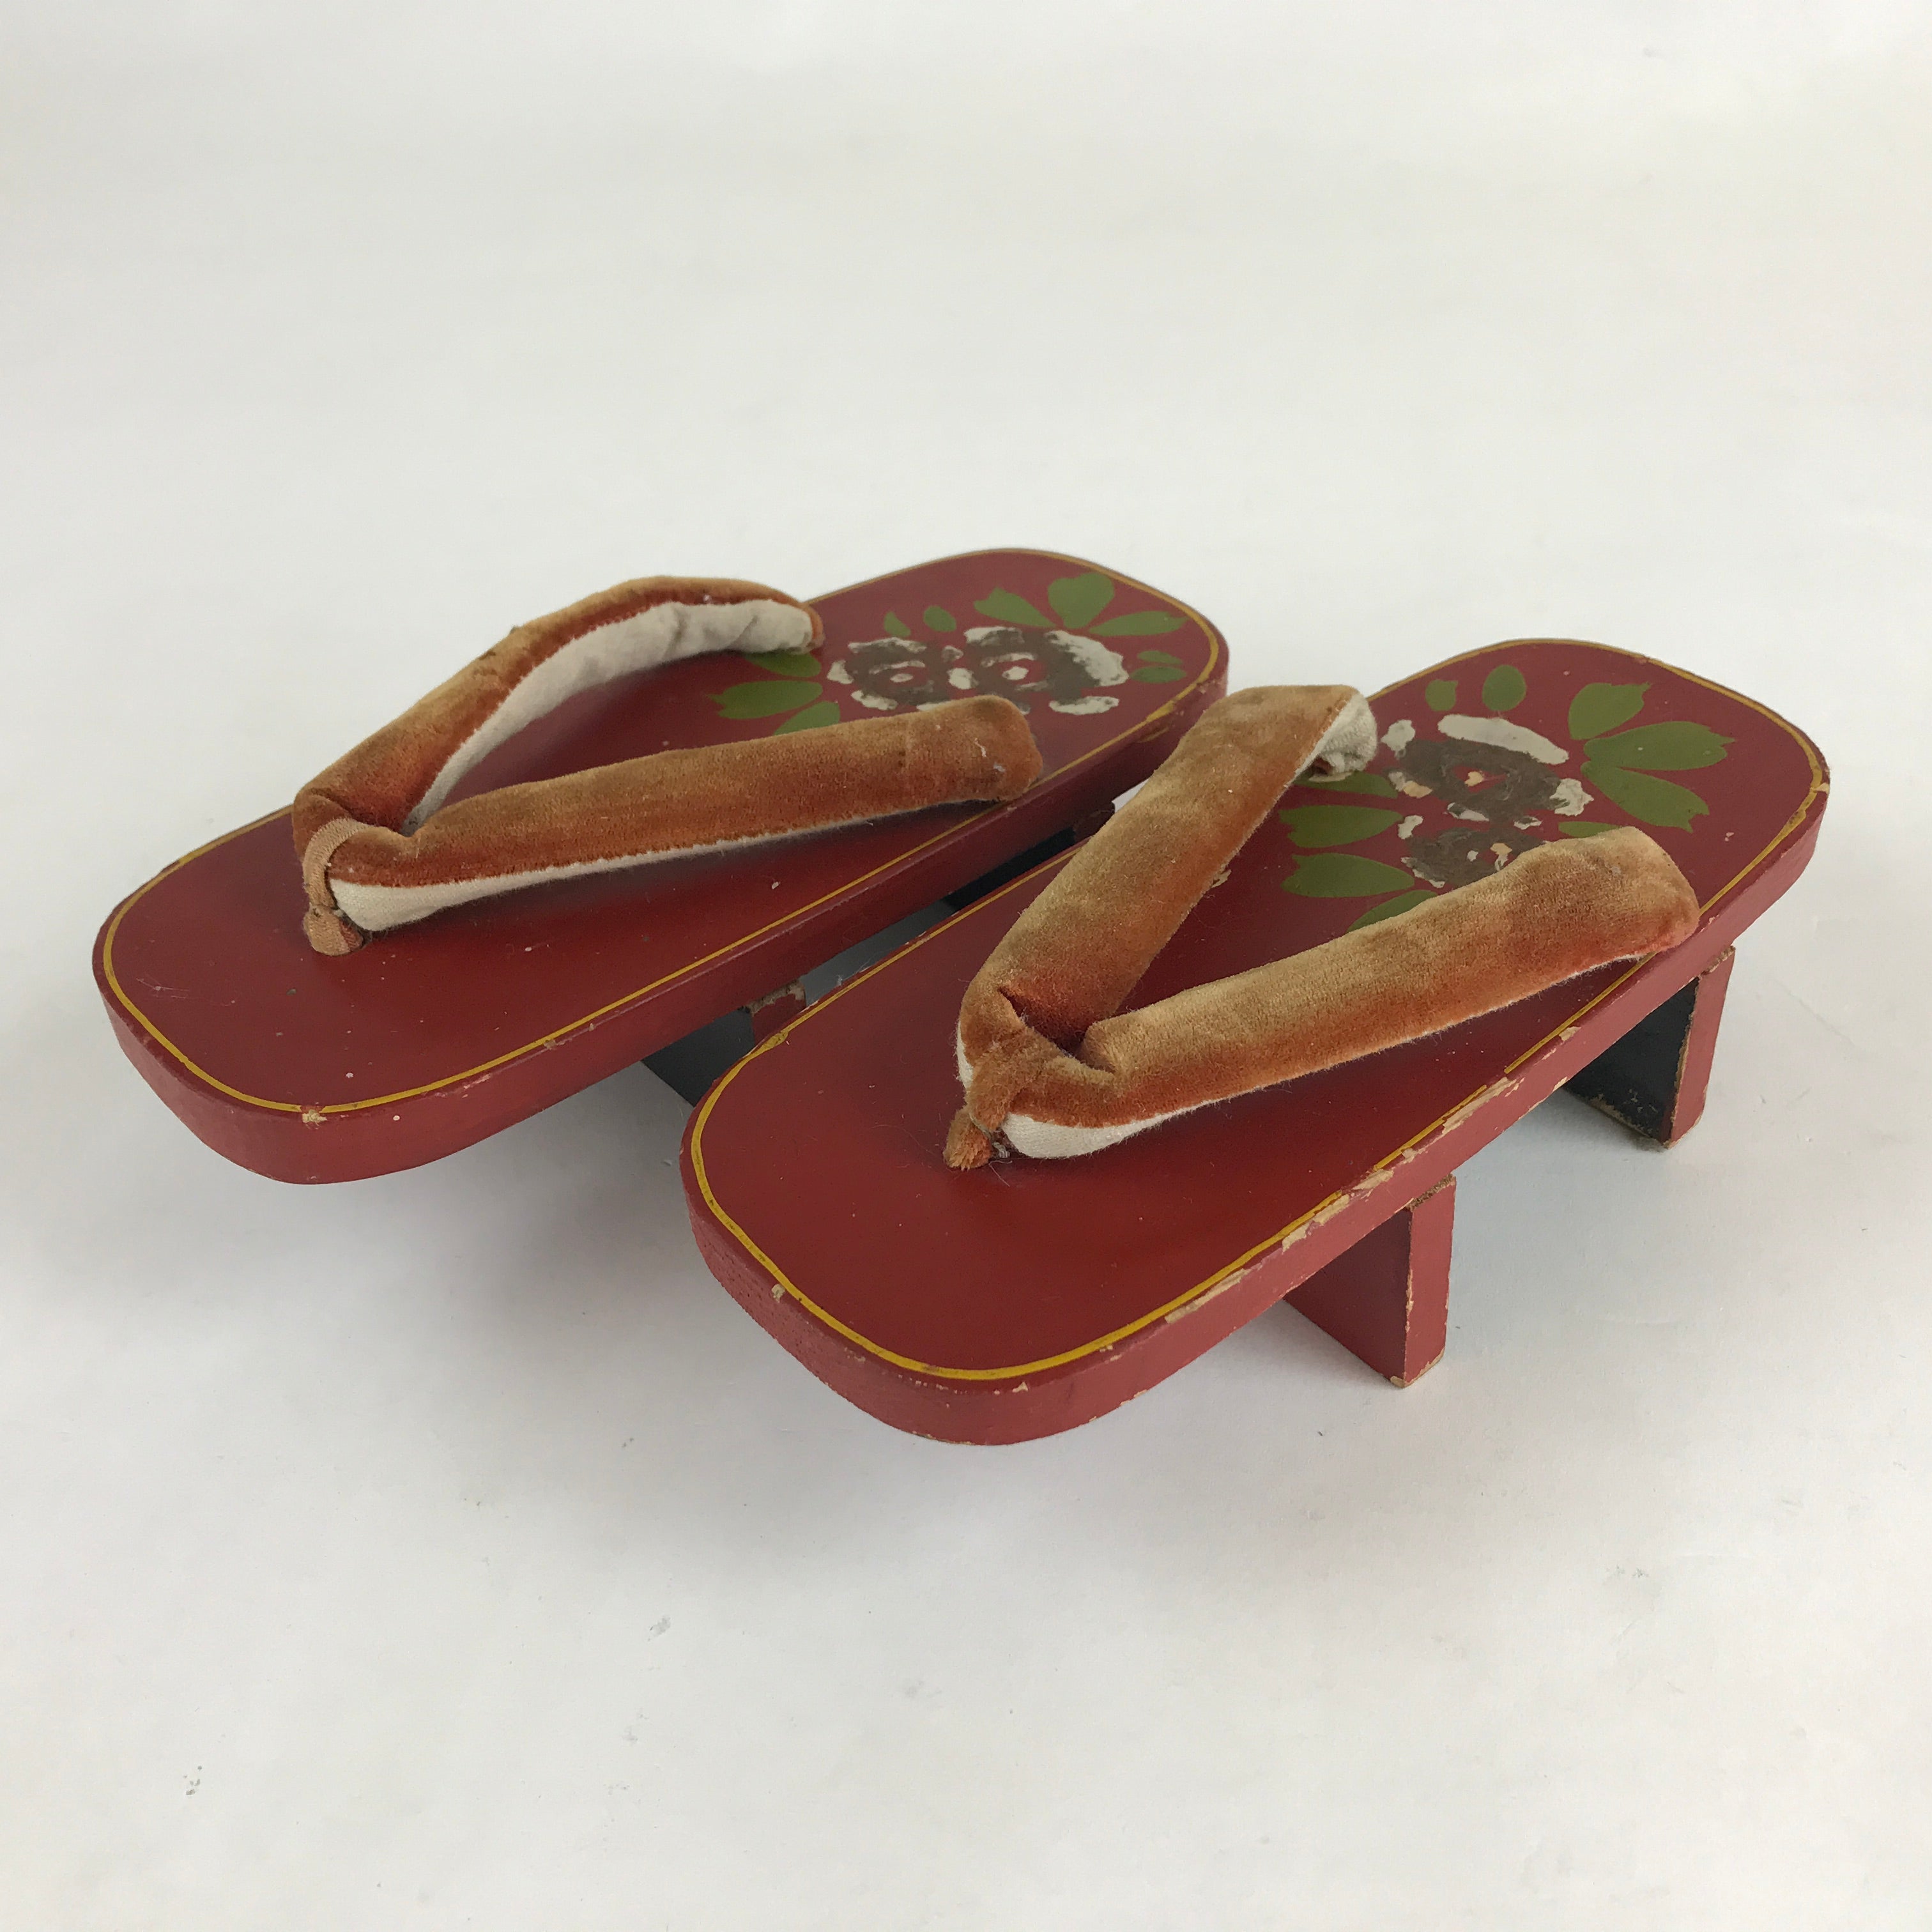 Buy Japanese Sandals, Geta Sandals, Japanese Shoes, Wooden Geta Online in  India - Etsy